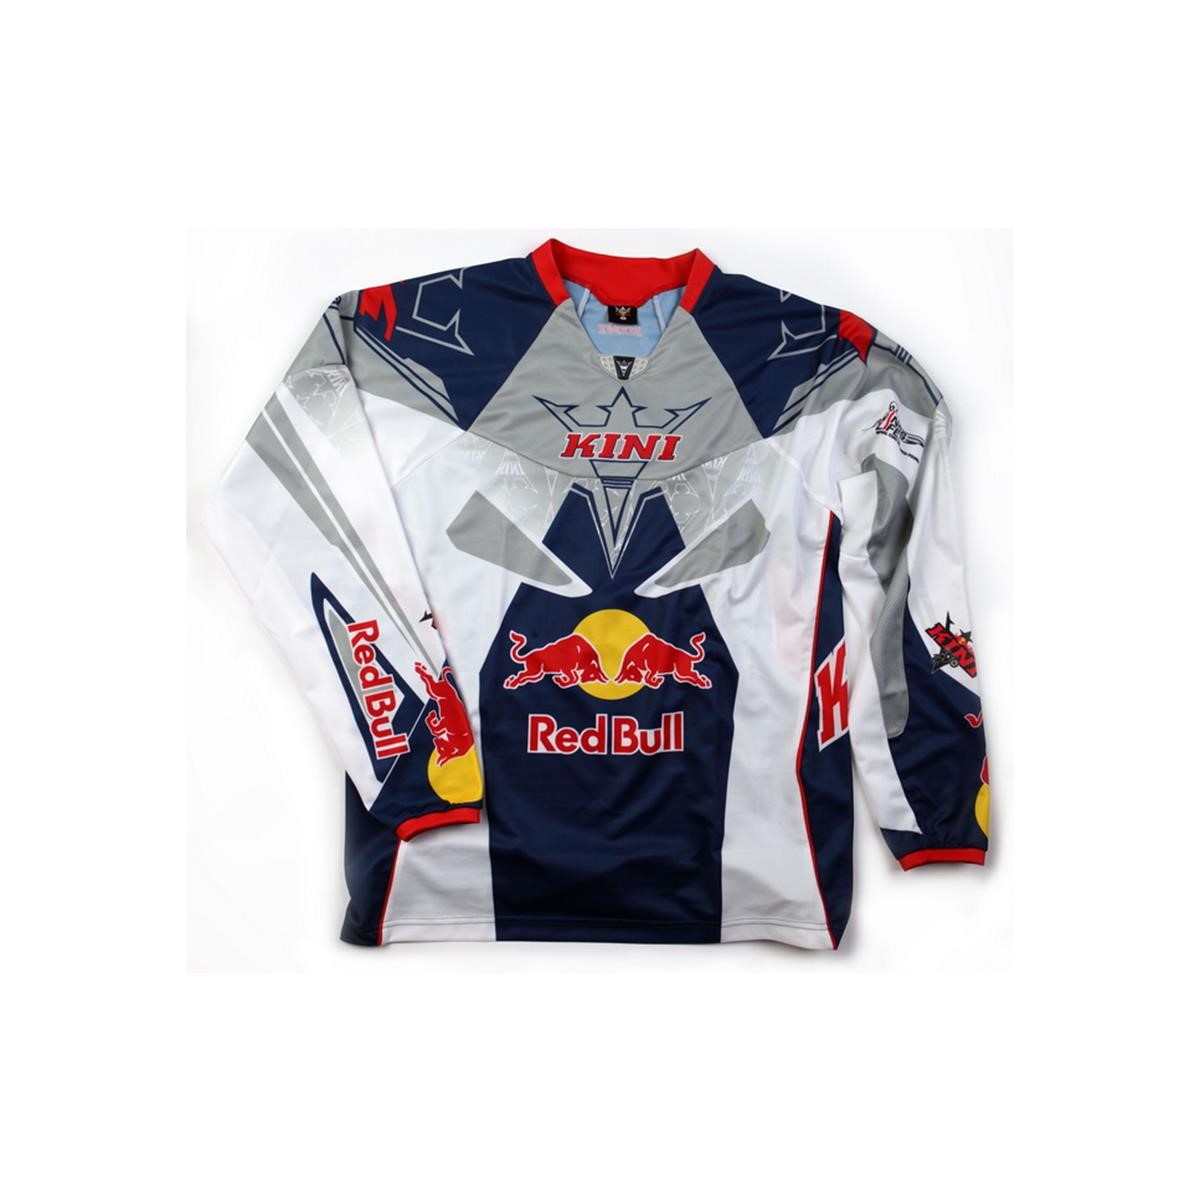 Motocross/MTB Bekleidung-MX Jersey - Kini Red Bull Jersey Competition White/Blue